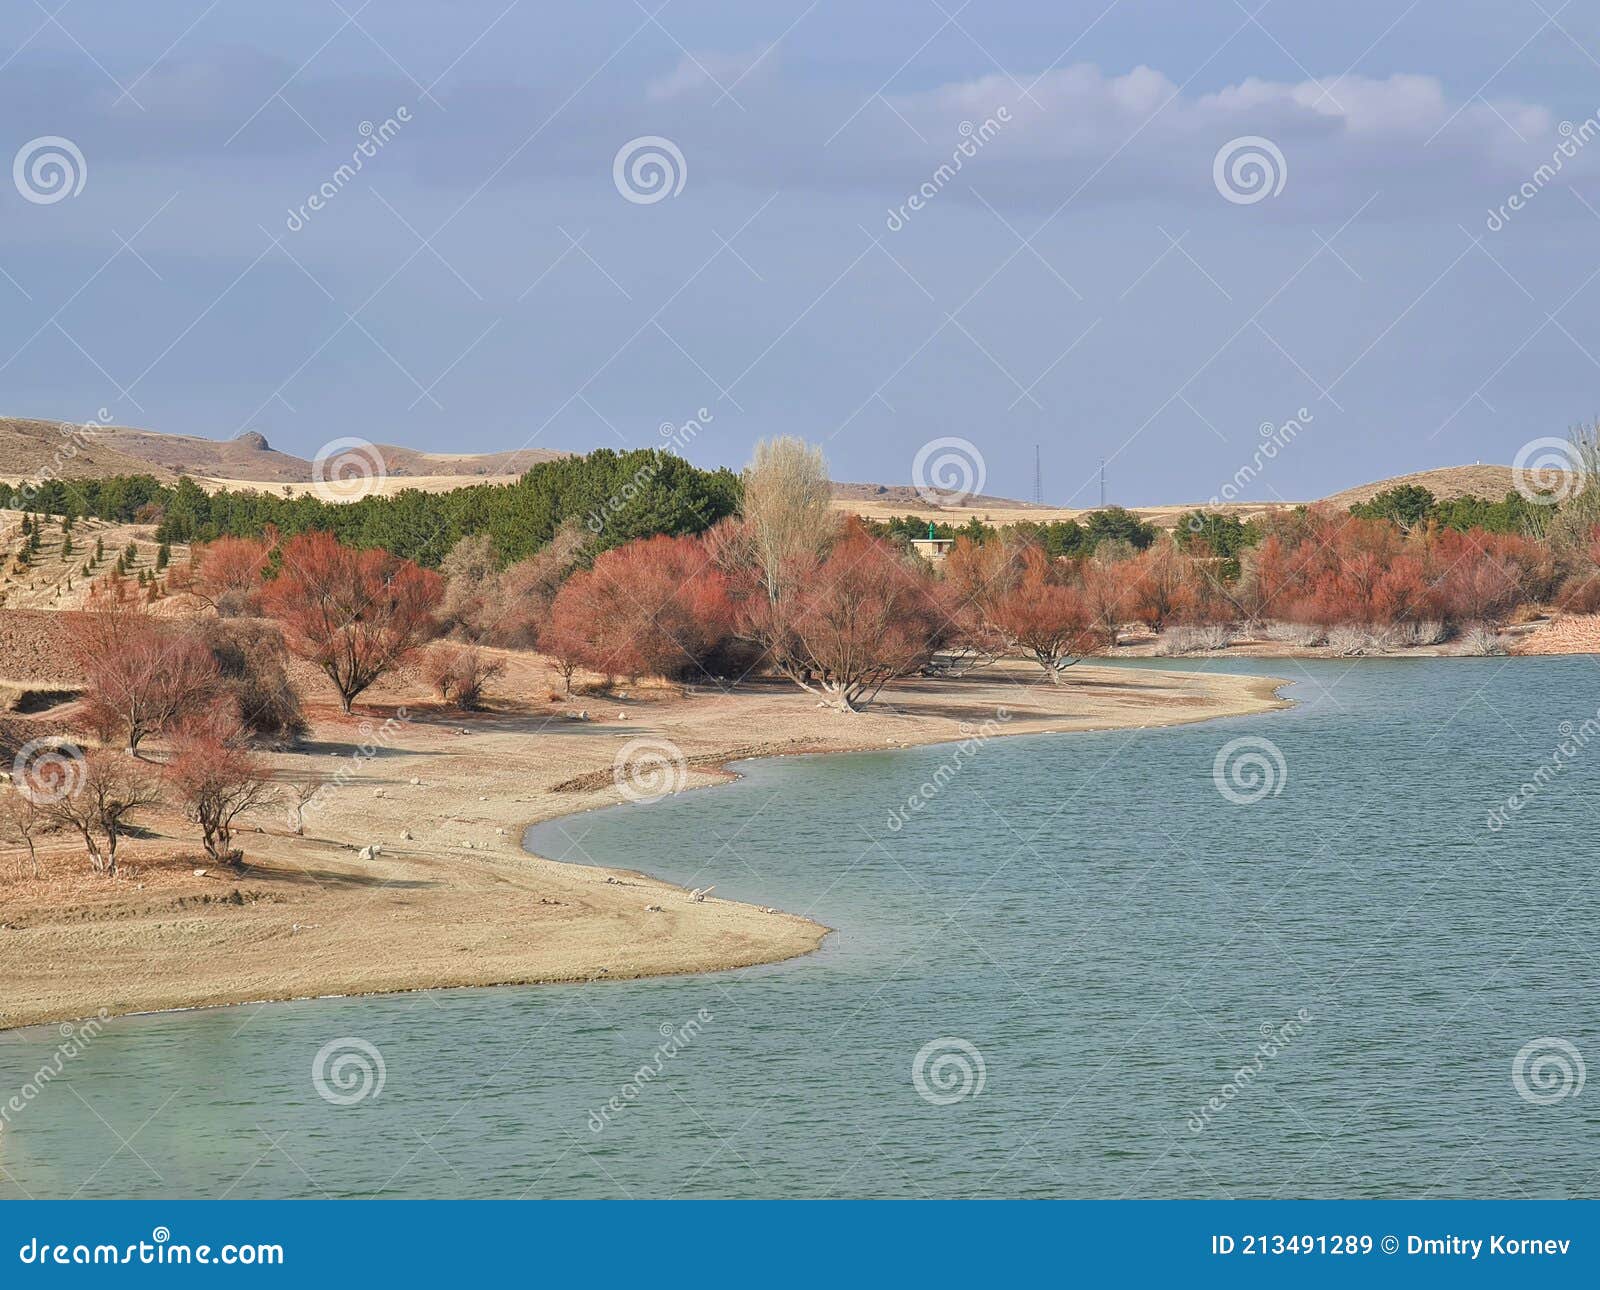 a desert lake surrounded by the brightly dressed trees